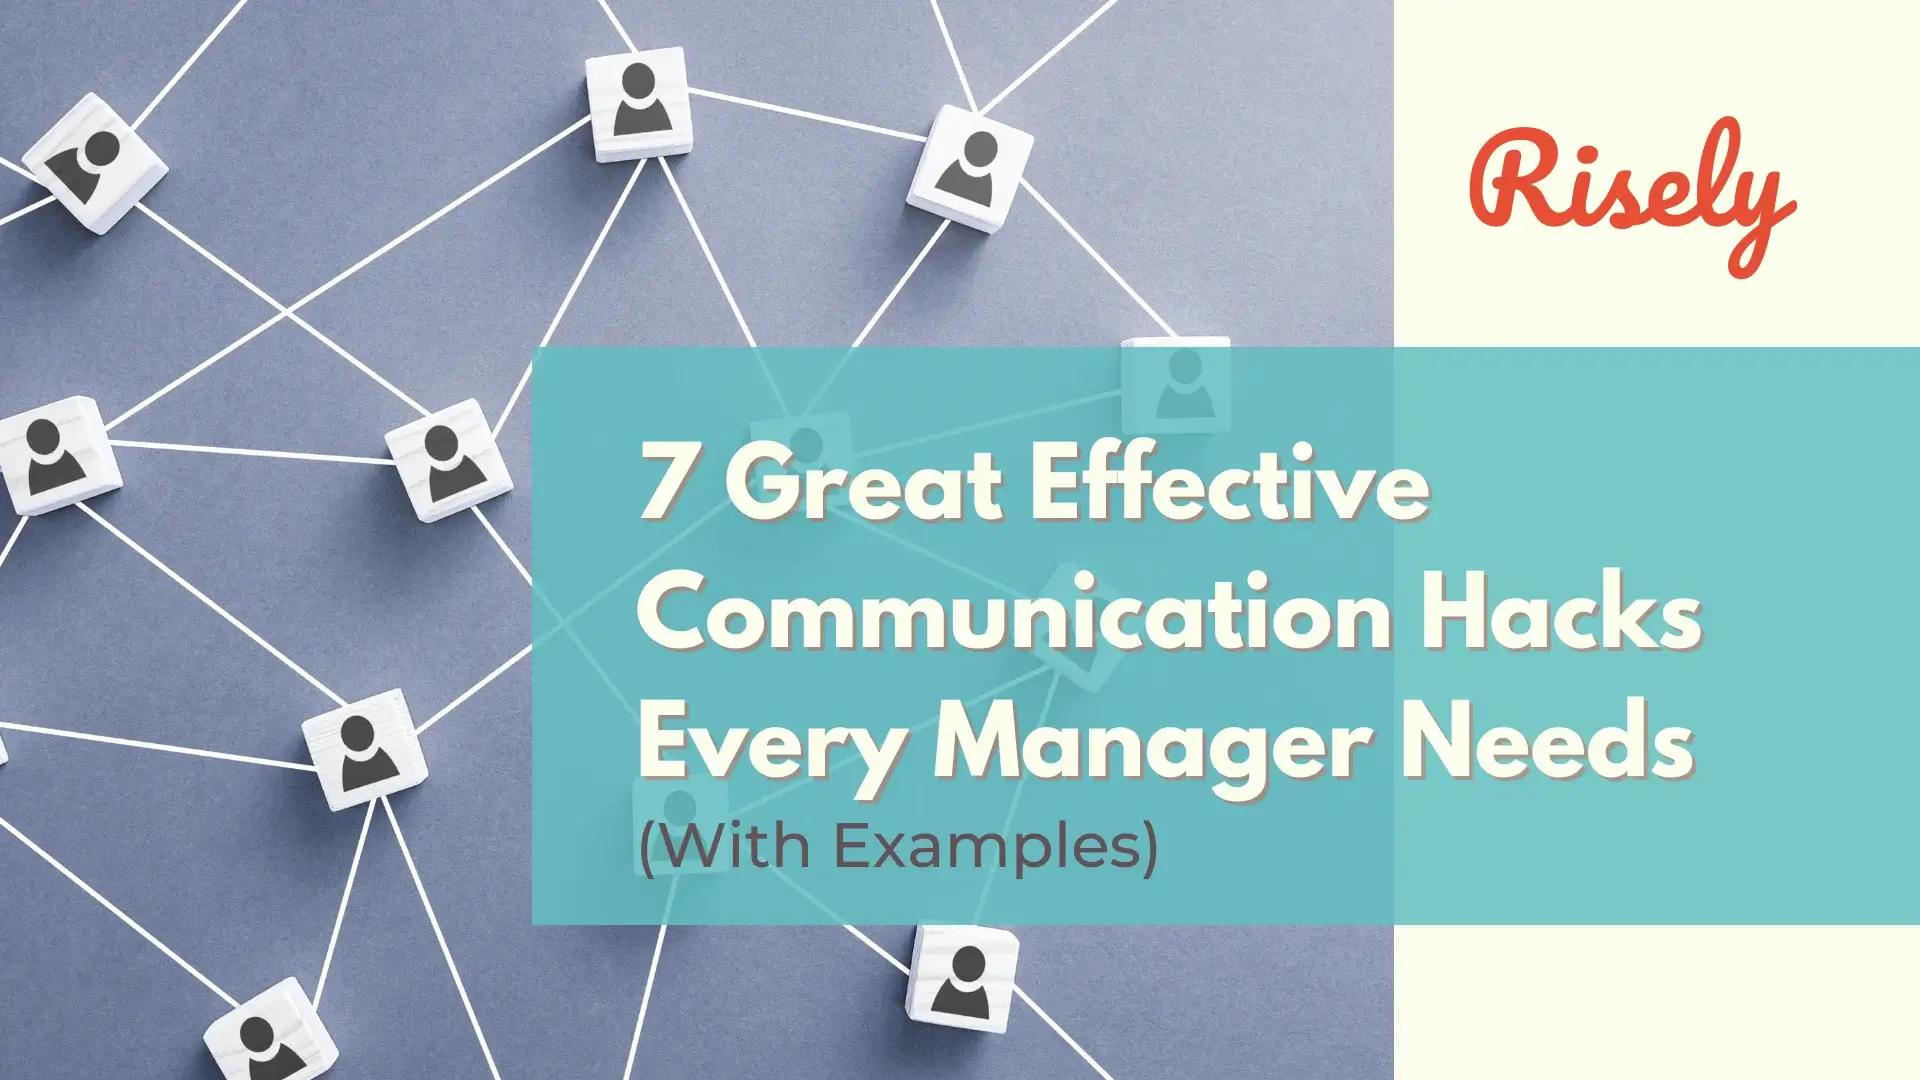 communicate effectively